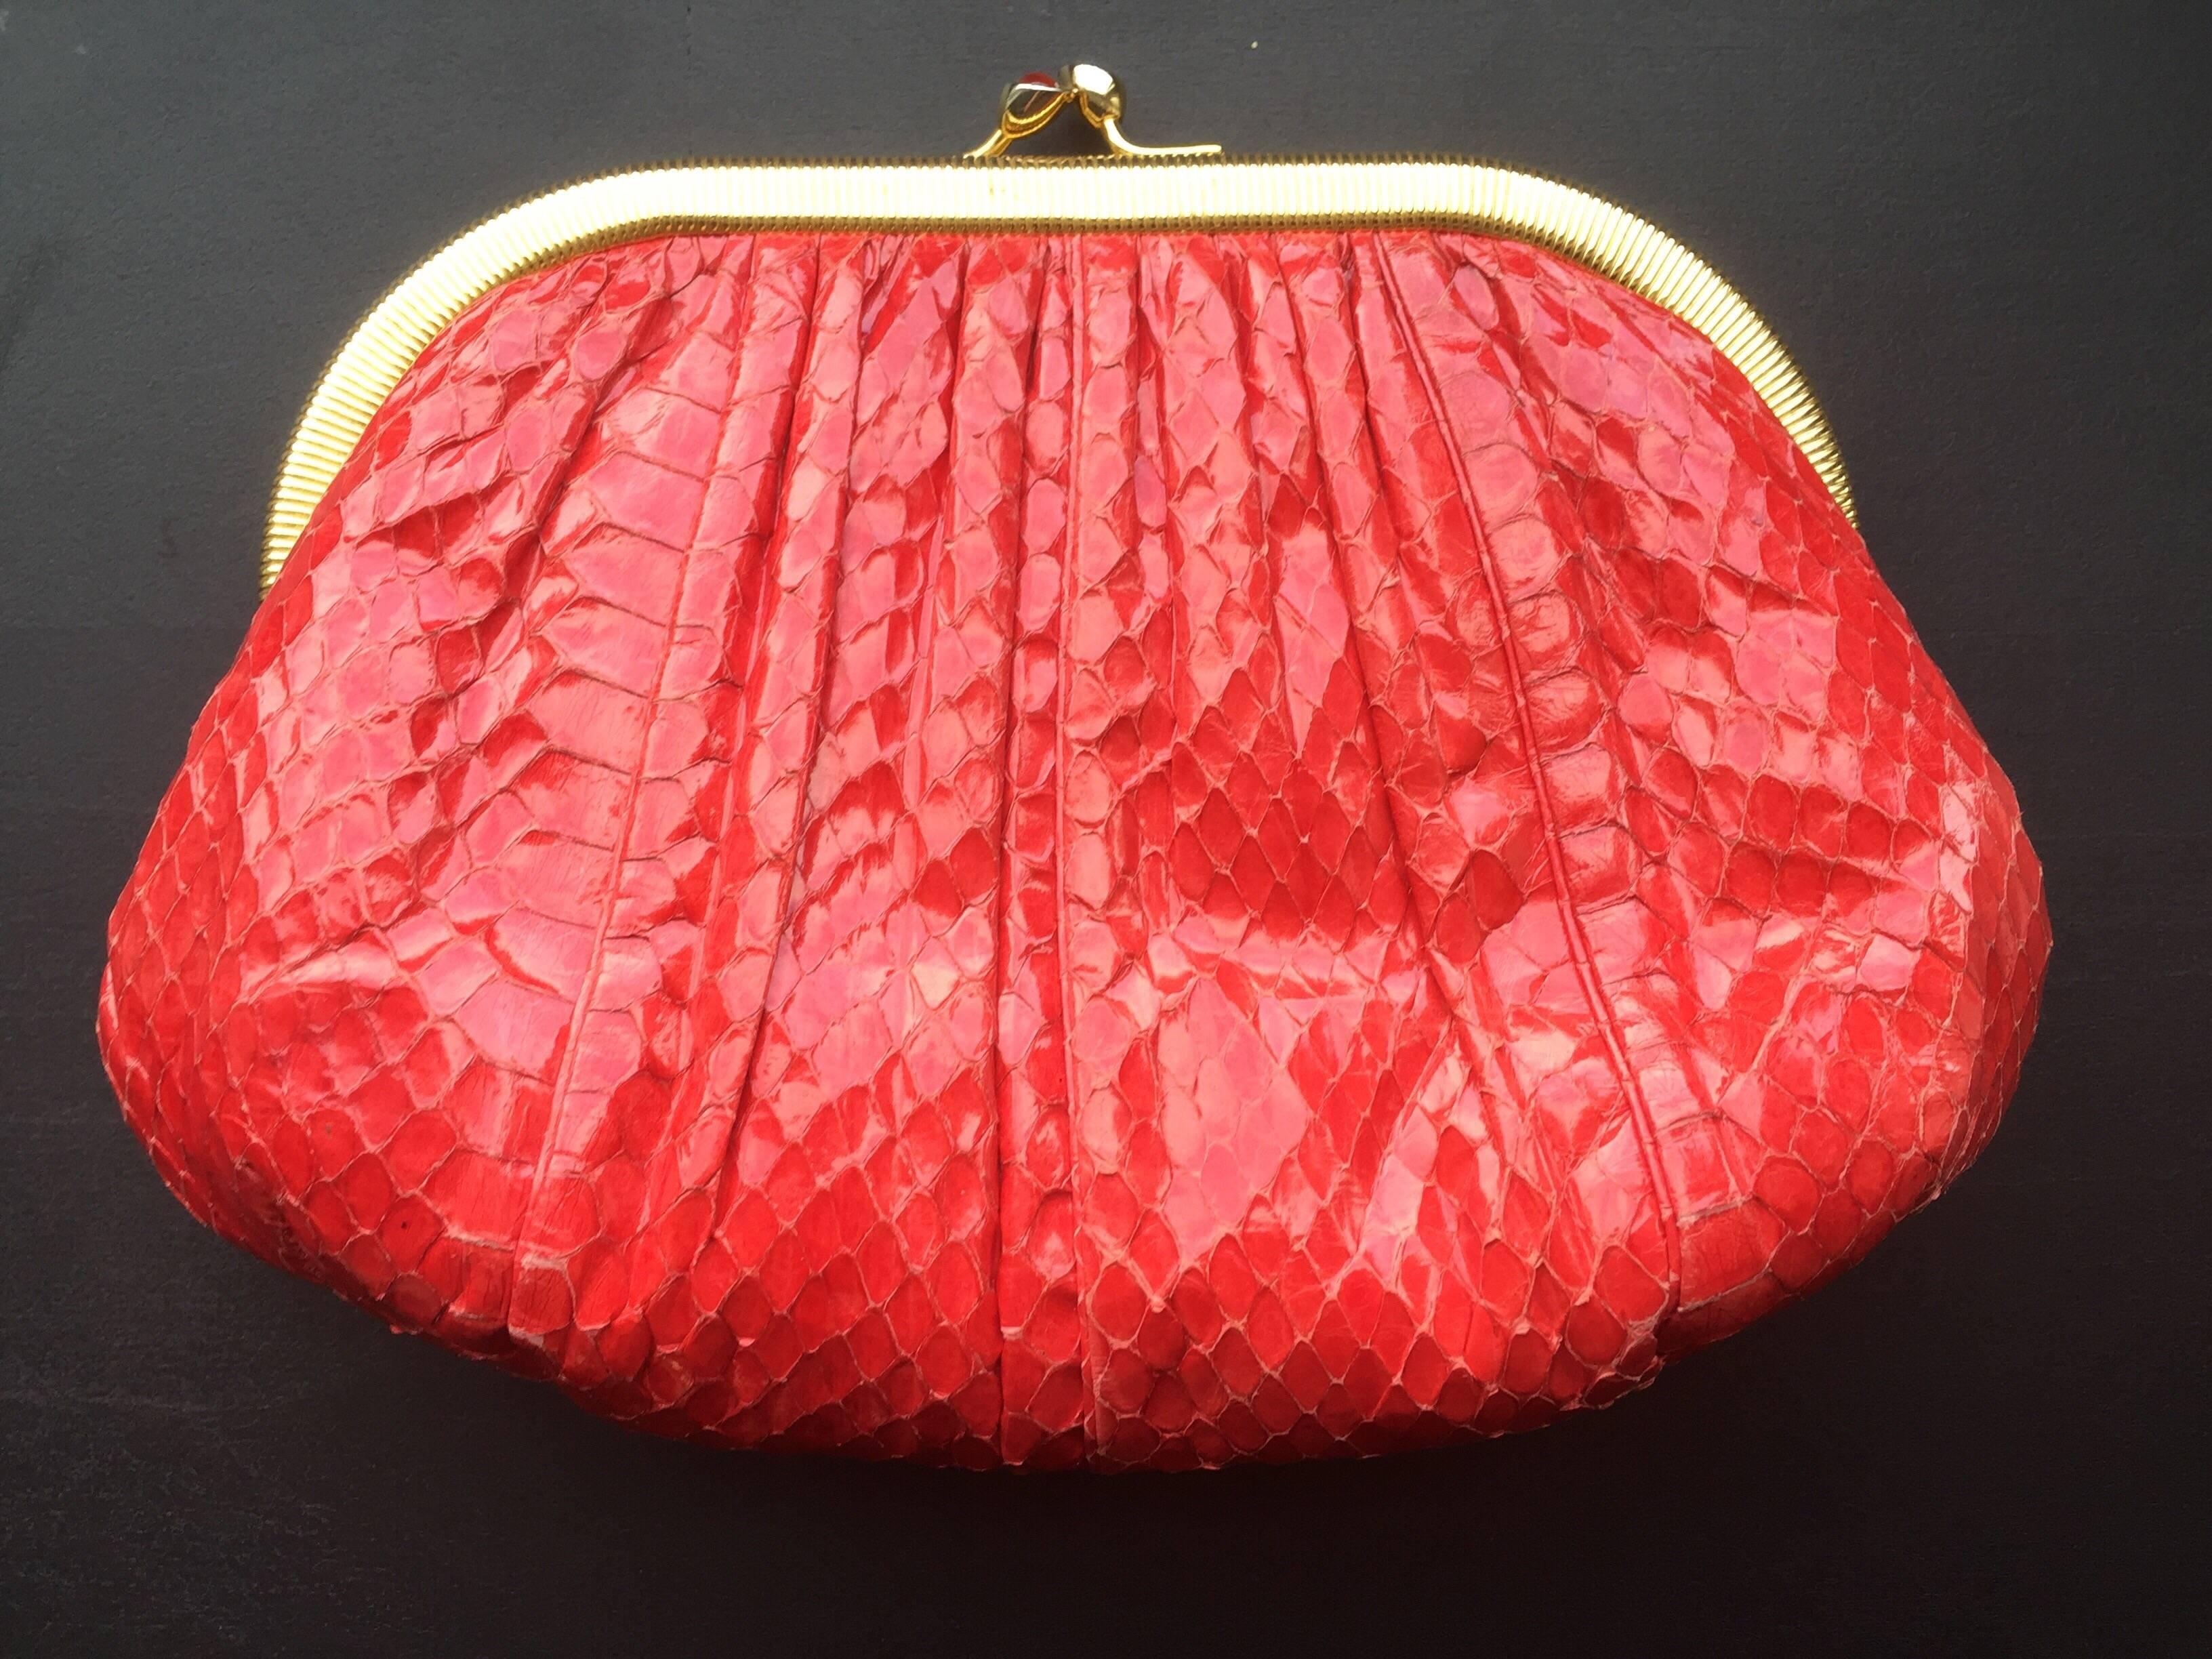 This Judith Leiber clutch is from the early 1980s.  This snakeskin clutch features gold hardware, snap closure, and an optional gold chain shoulder strap. The inside has a silk lining and small zipper pocket. The piece can be used as a shoulder bag